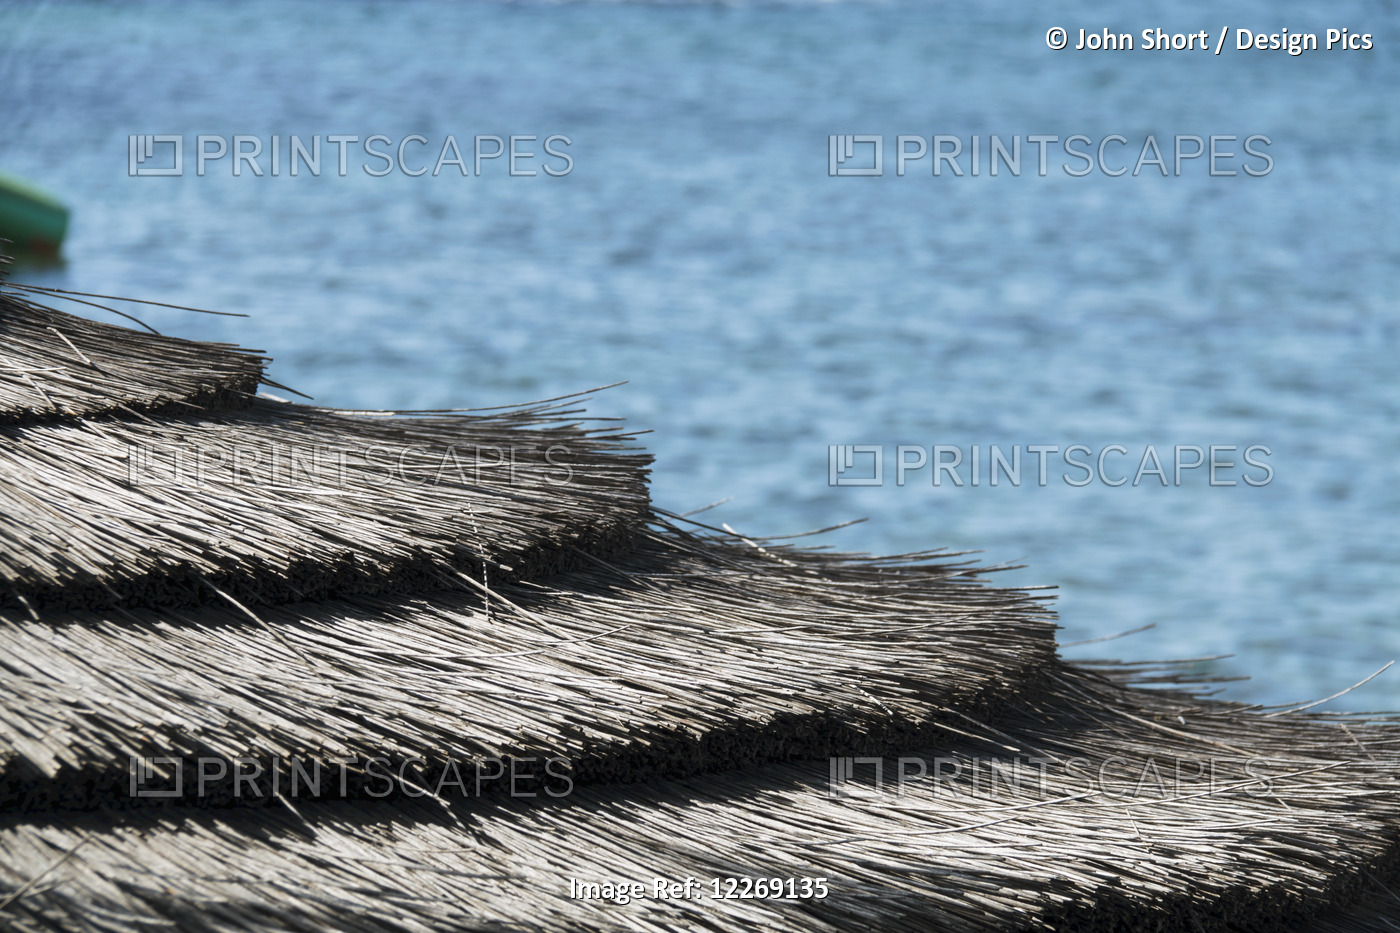 Architectural Details Of A Thatched Roof At The Water's Edge; Paphos, Cyprus